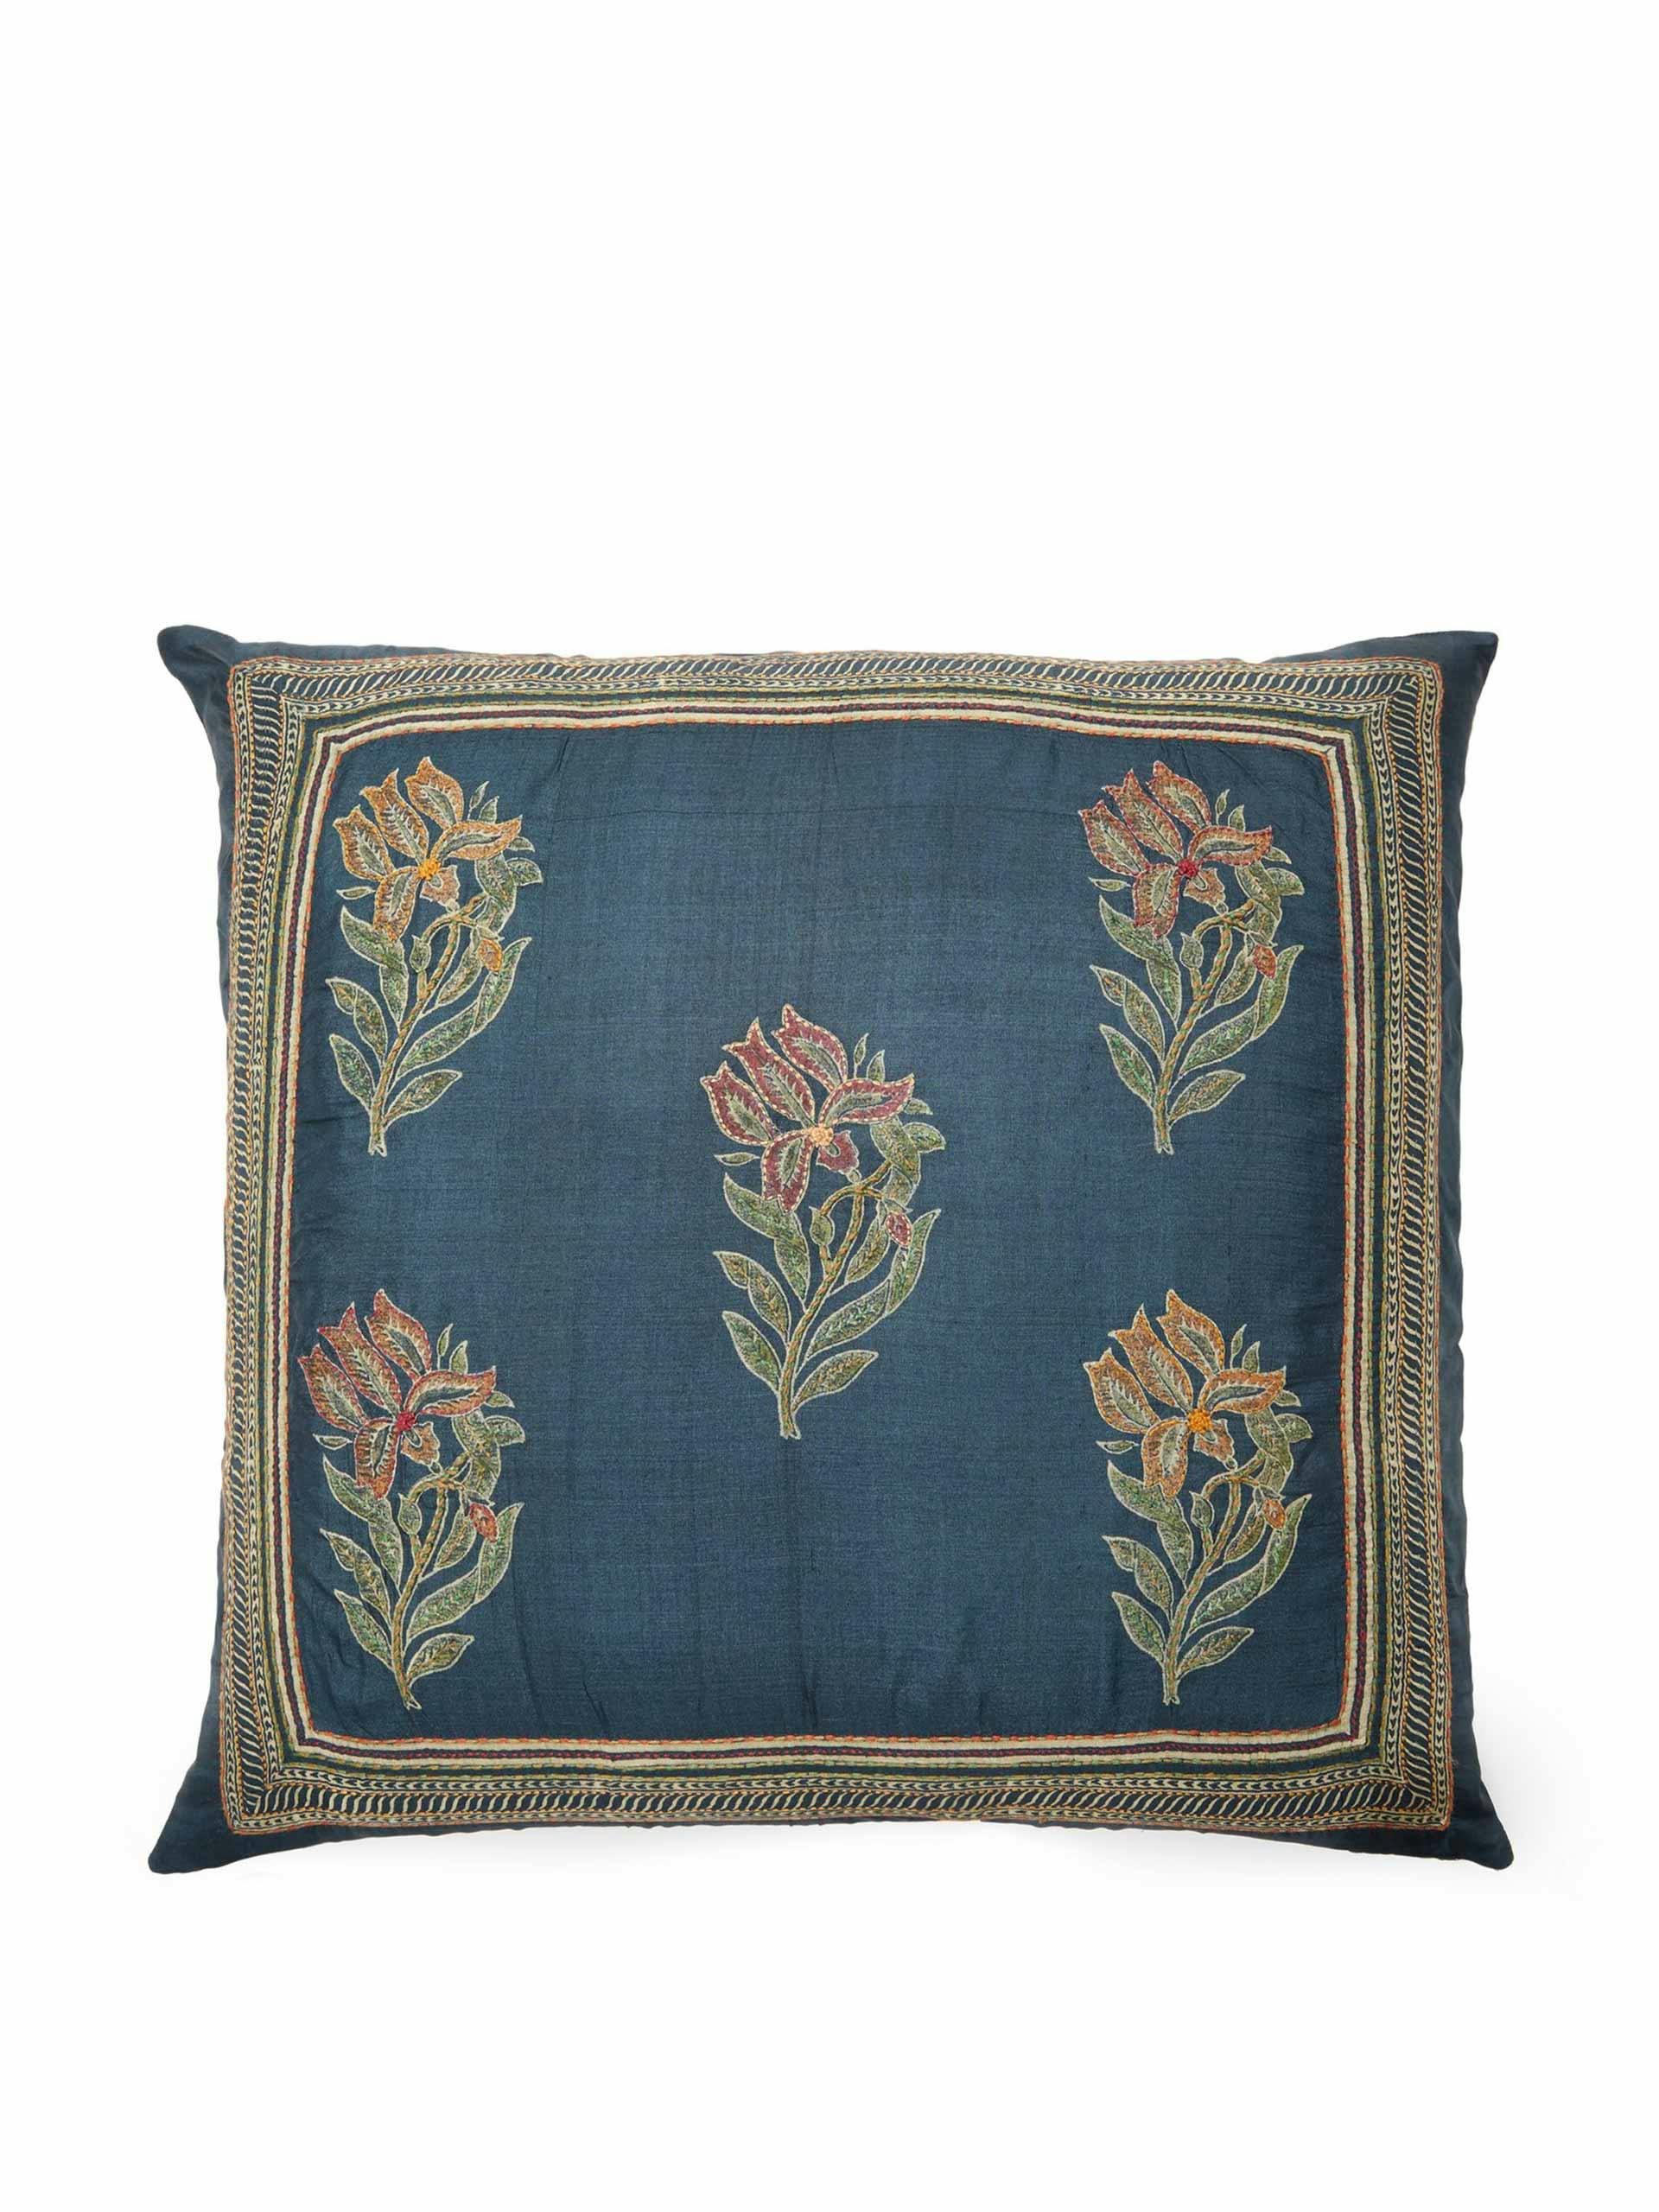 Lily-embroidered silk pillow